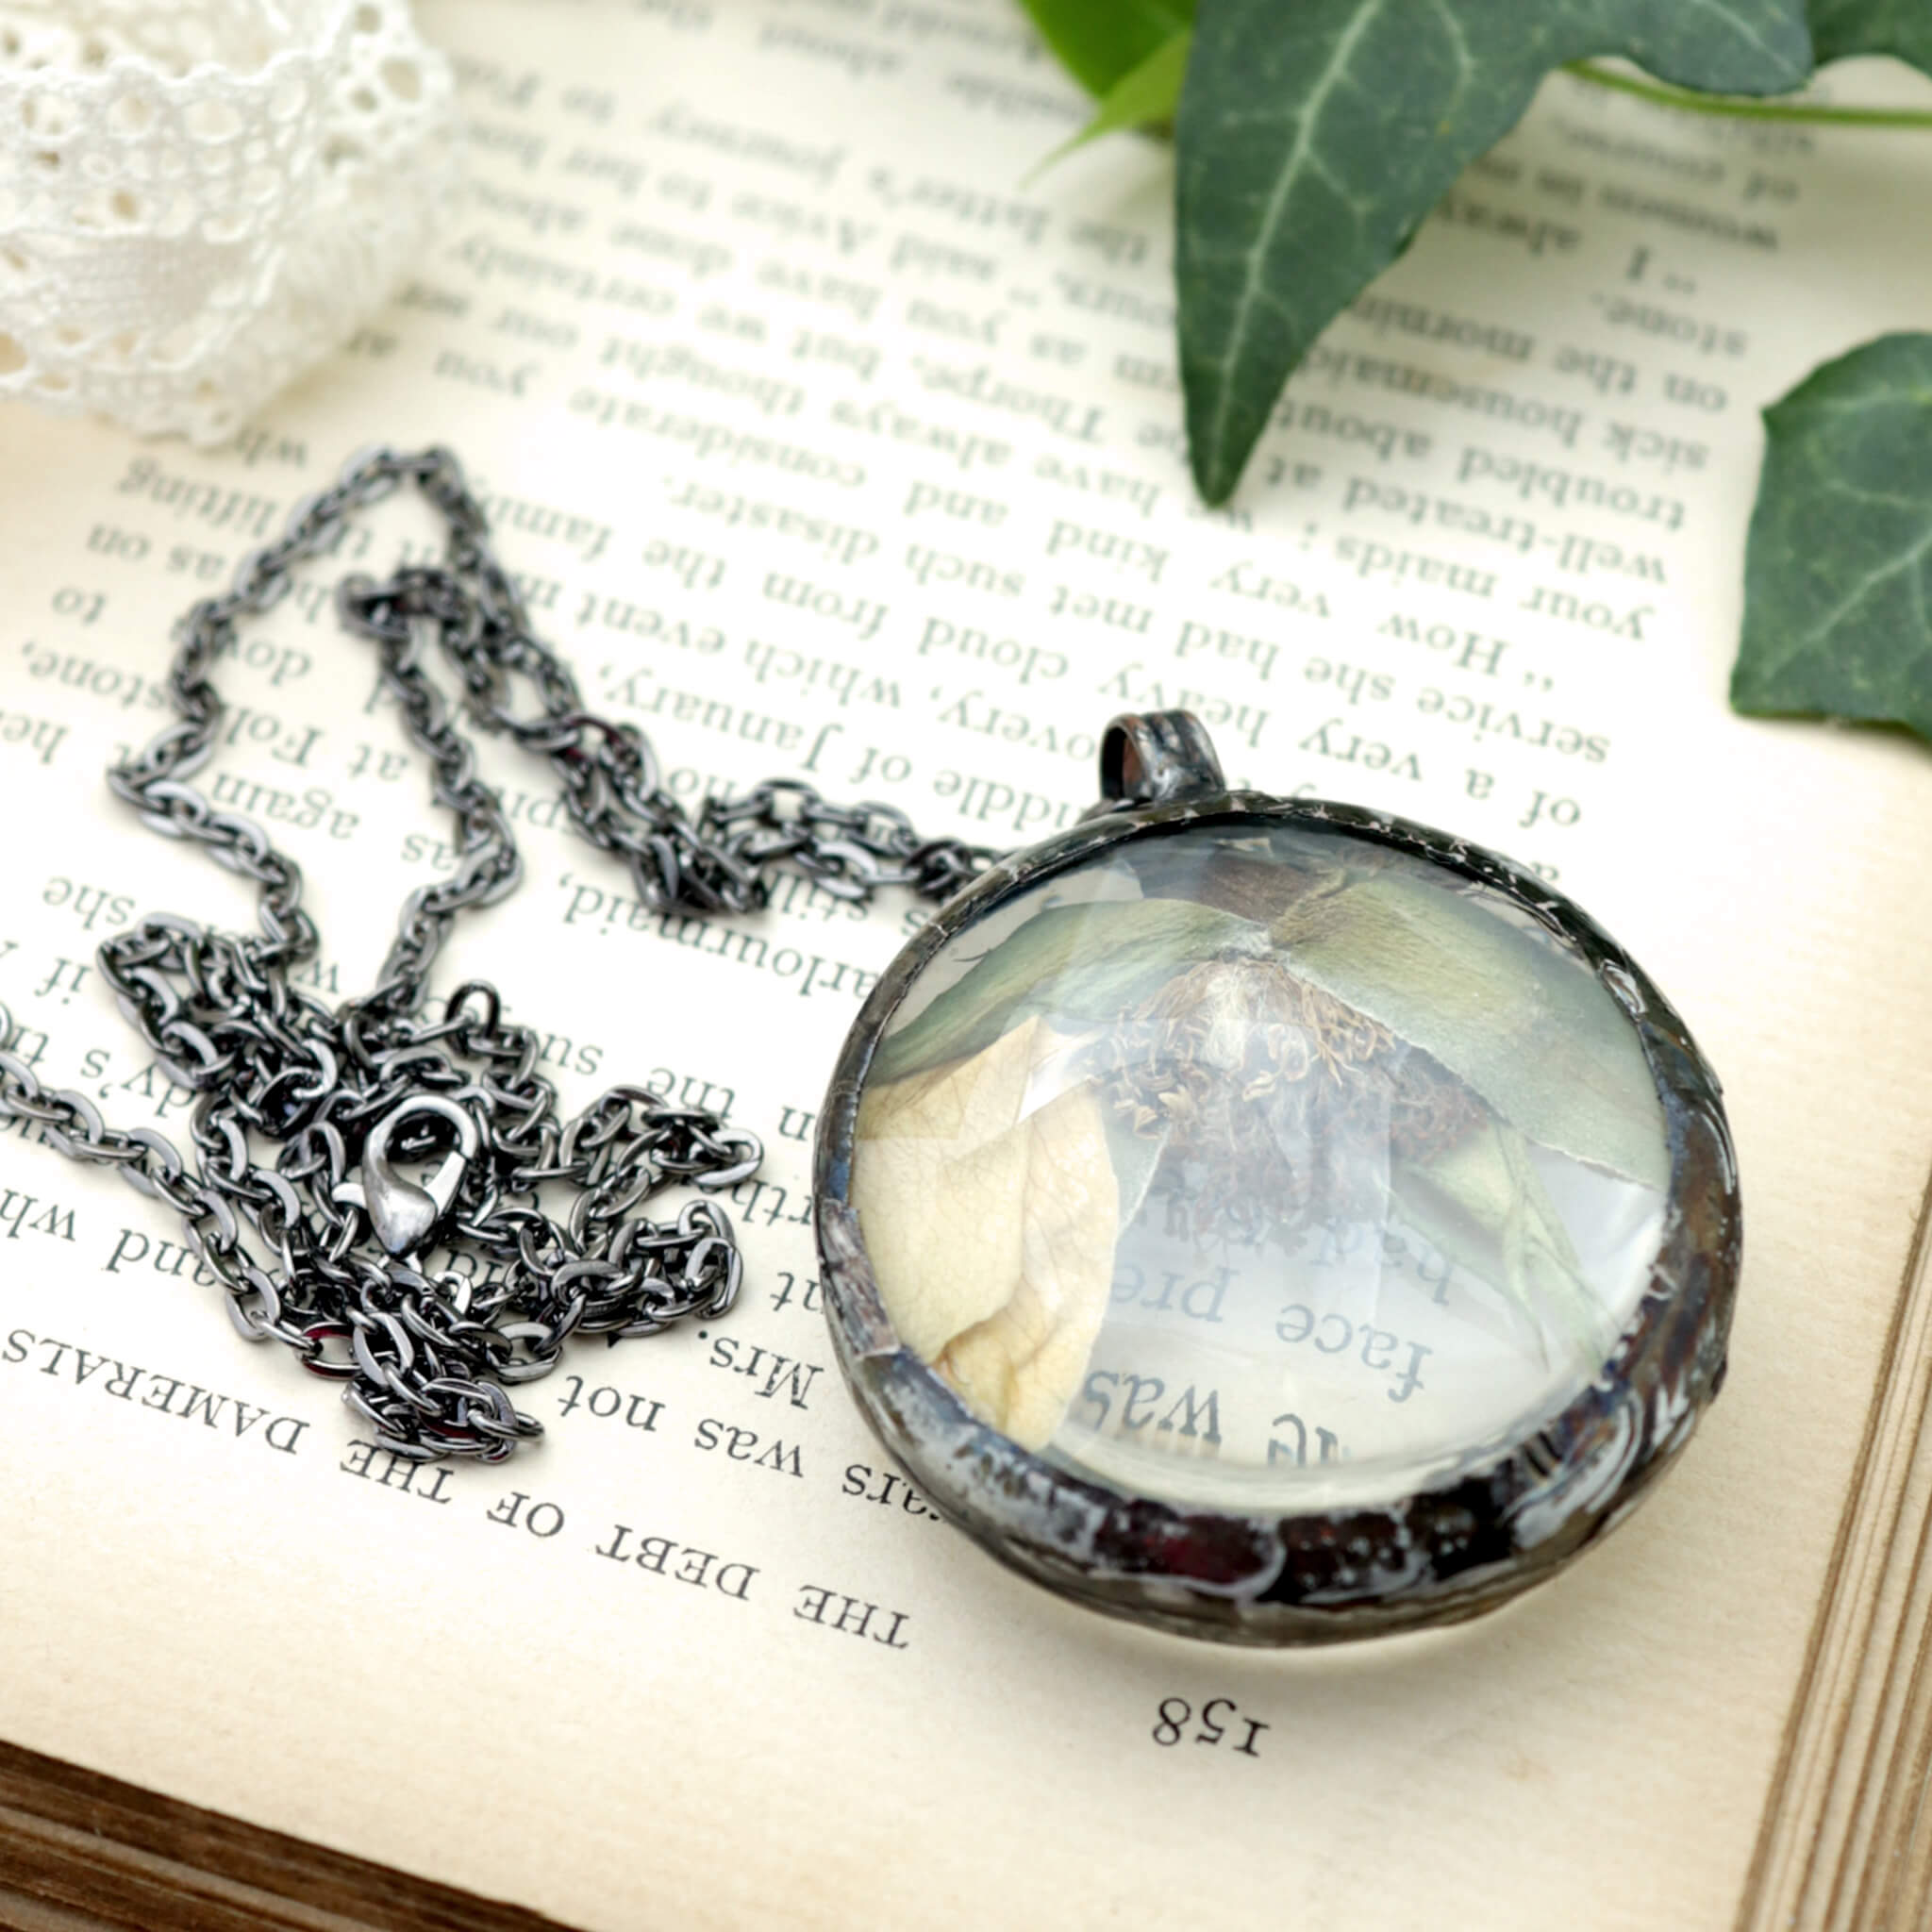 Withered rose necklace lying on a vintage book